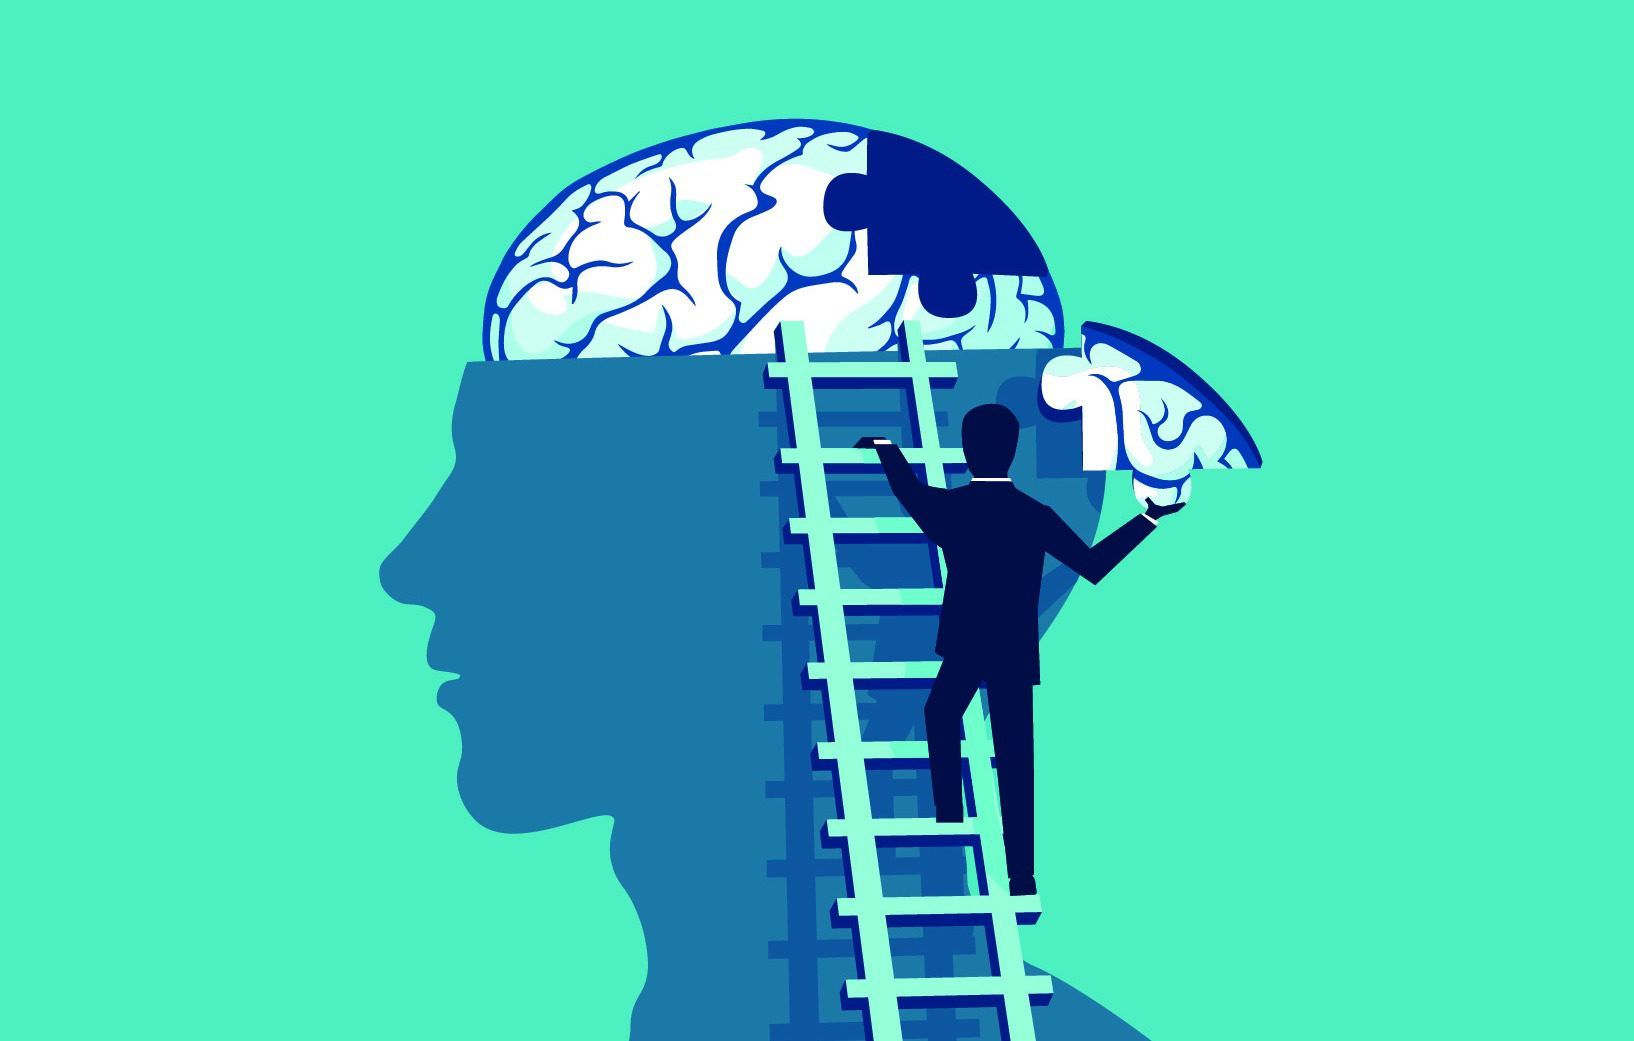 illustration of a man putting the brain puzzle together